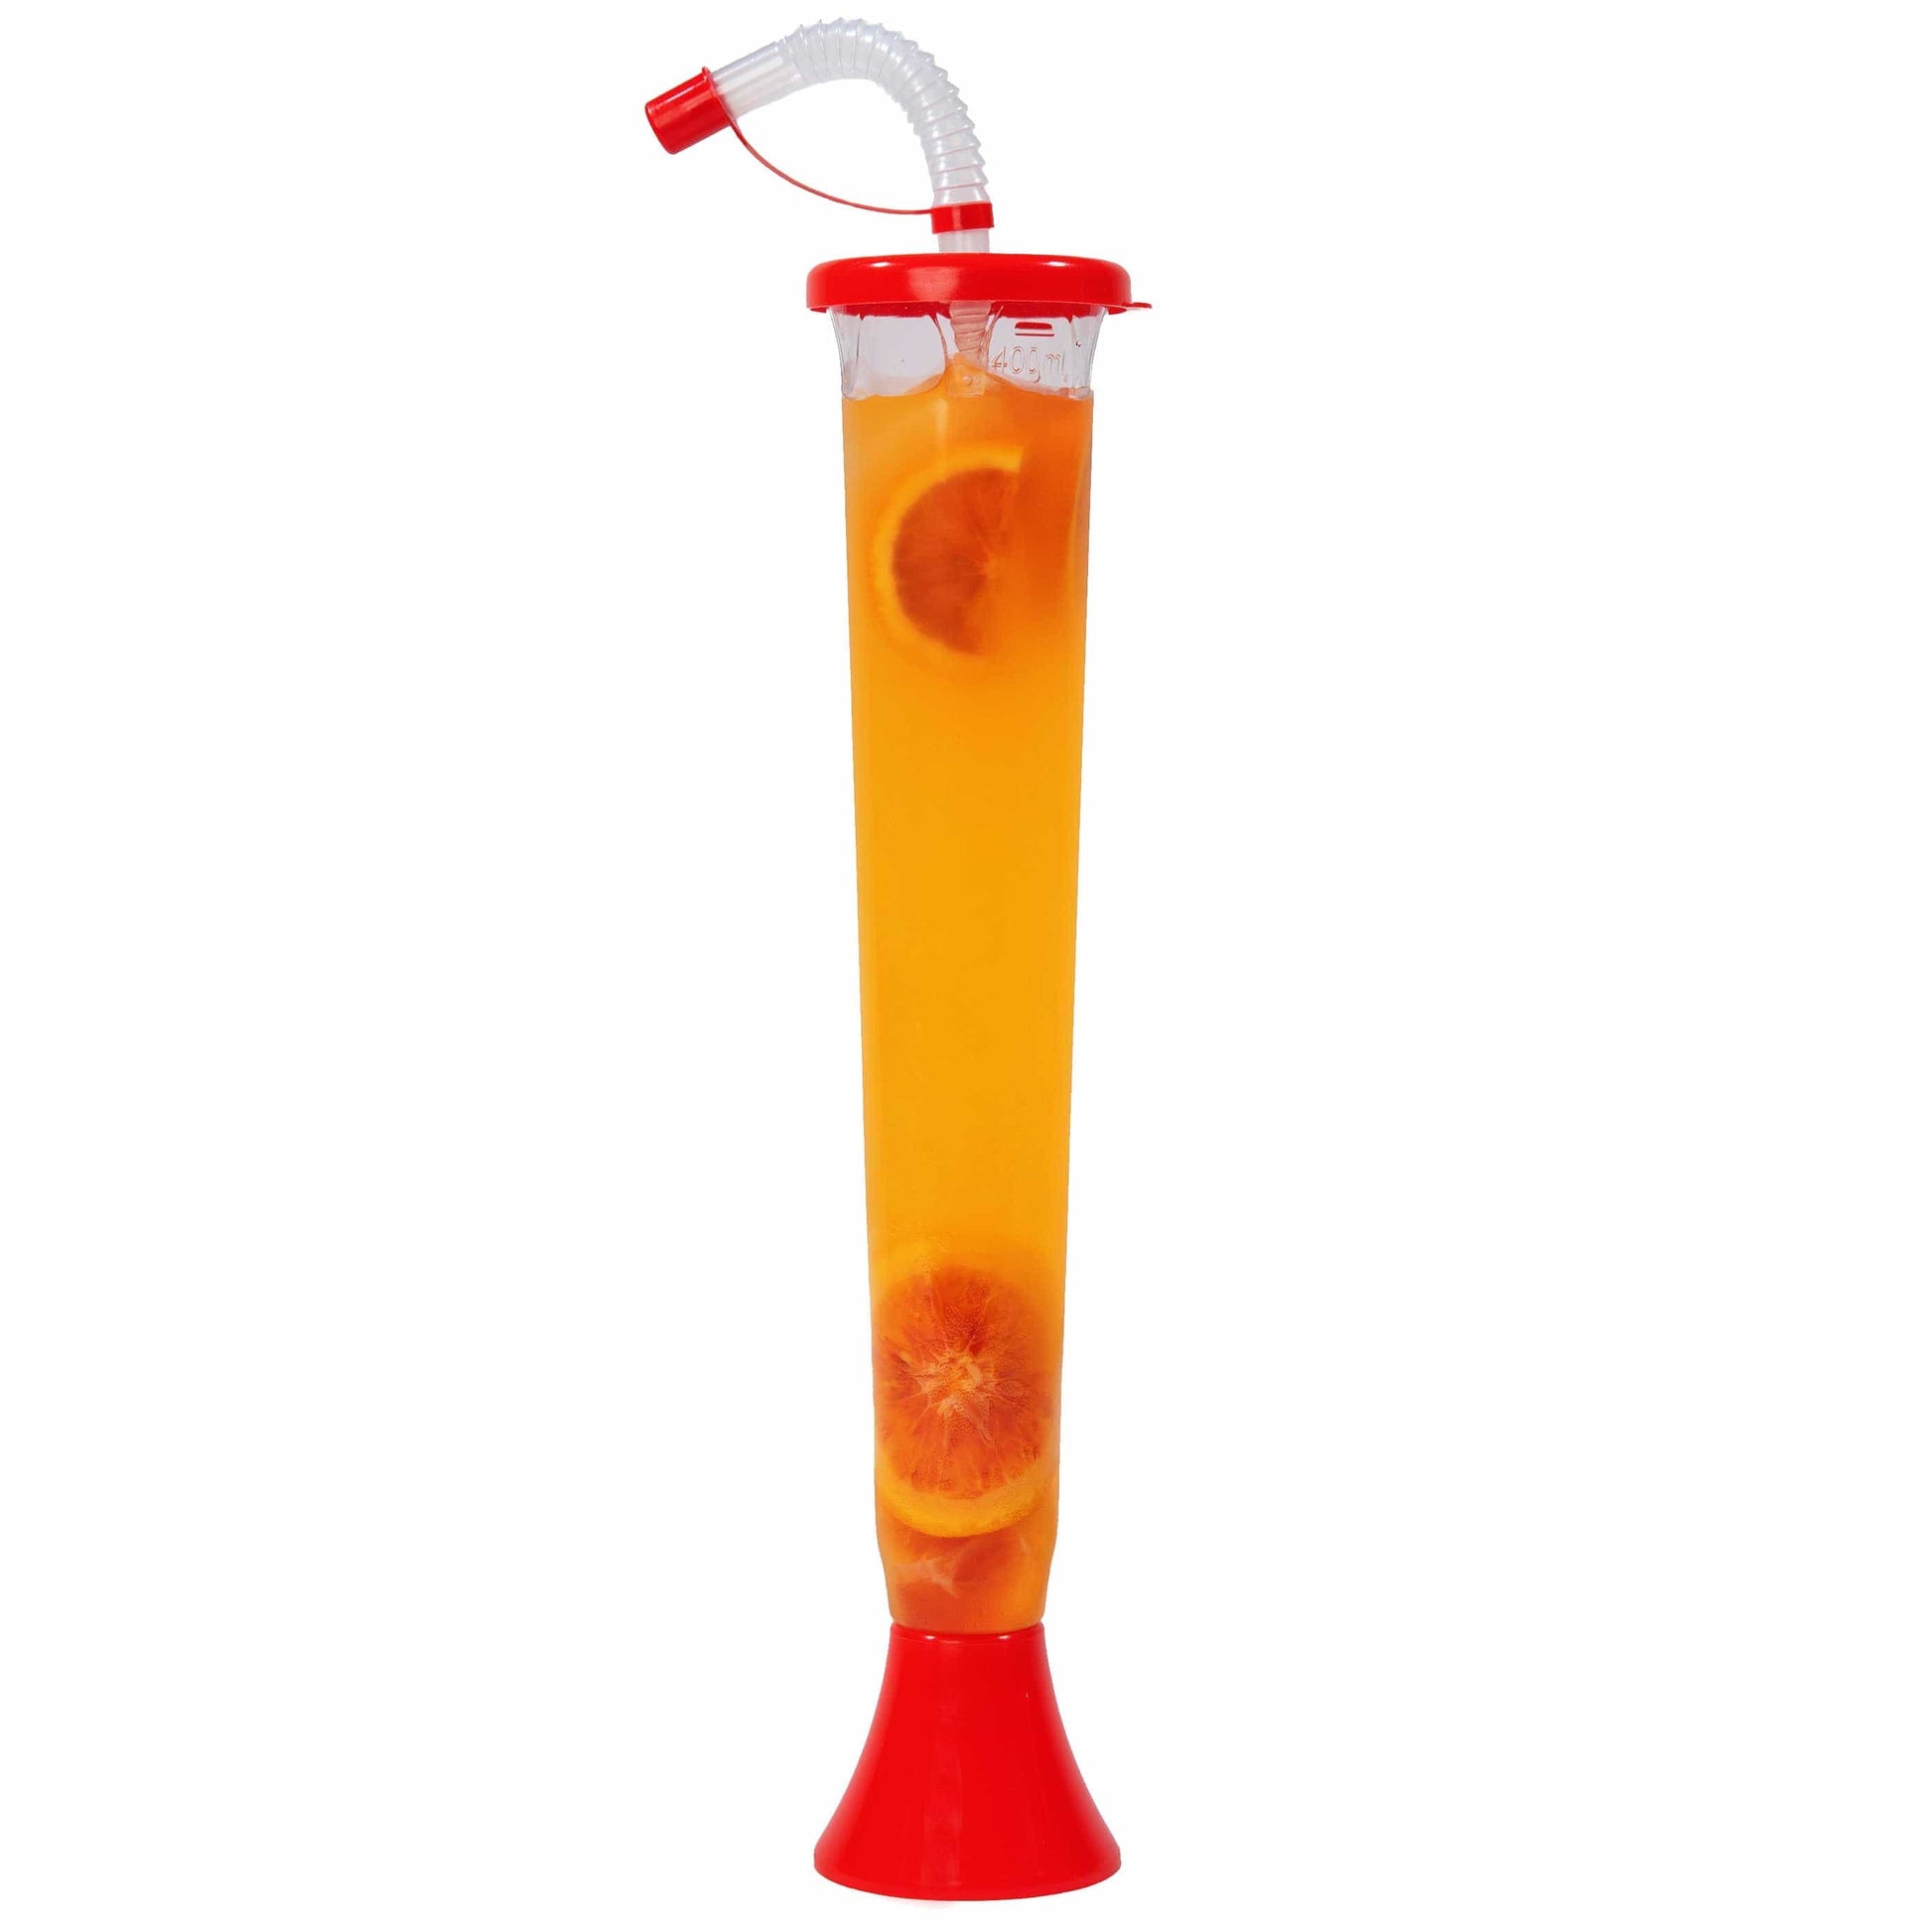 Sweet World USA Yard Cups (54 or 108 Cups) Yard Cups with RED Lids and Straws - 14oz - for Margaritas and Frozen Drinks cups with lids and straws